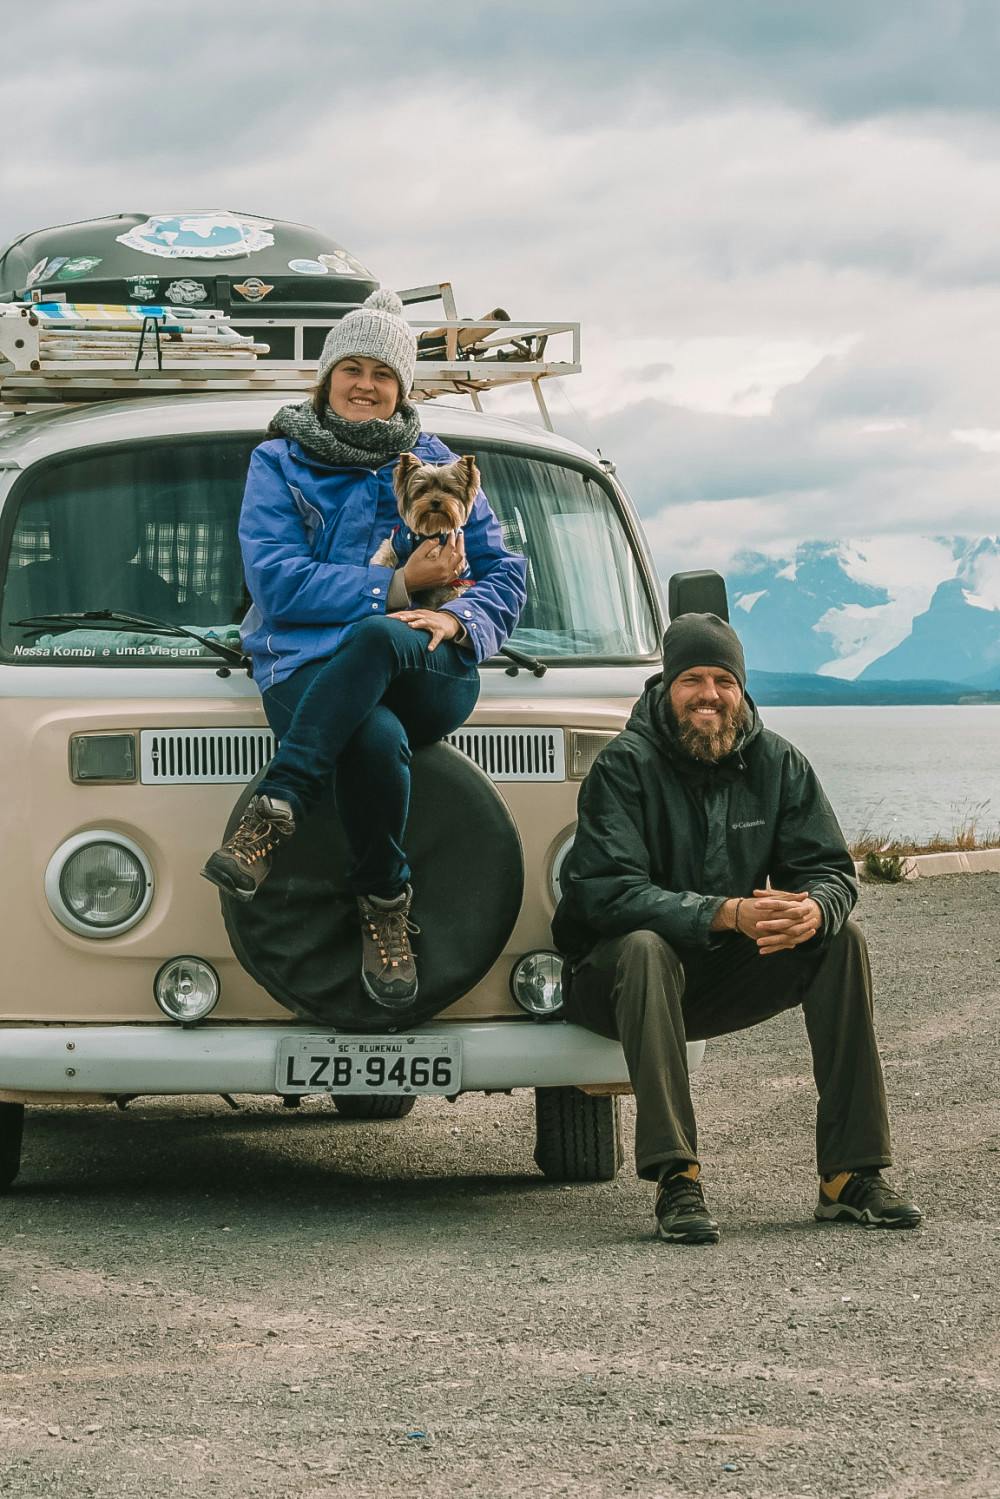 A smiling woman wearing a blue jacket and a beanie sits on the front tire of a vintage cream-colored Volkswagen van, holding a small Yorkshire Terrier. A man with a beard, also smiling, sits on the ground leaning against the van, wearing a black beanie and jacket. They seem to be enjoying a chilly day with a scenic backdrop of mountains and a cloudy sky. The van has a roof rack with assorted gear, suggesting an adventurous road trip.